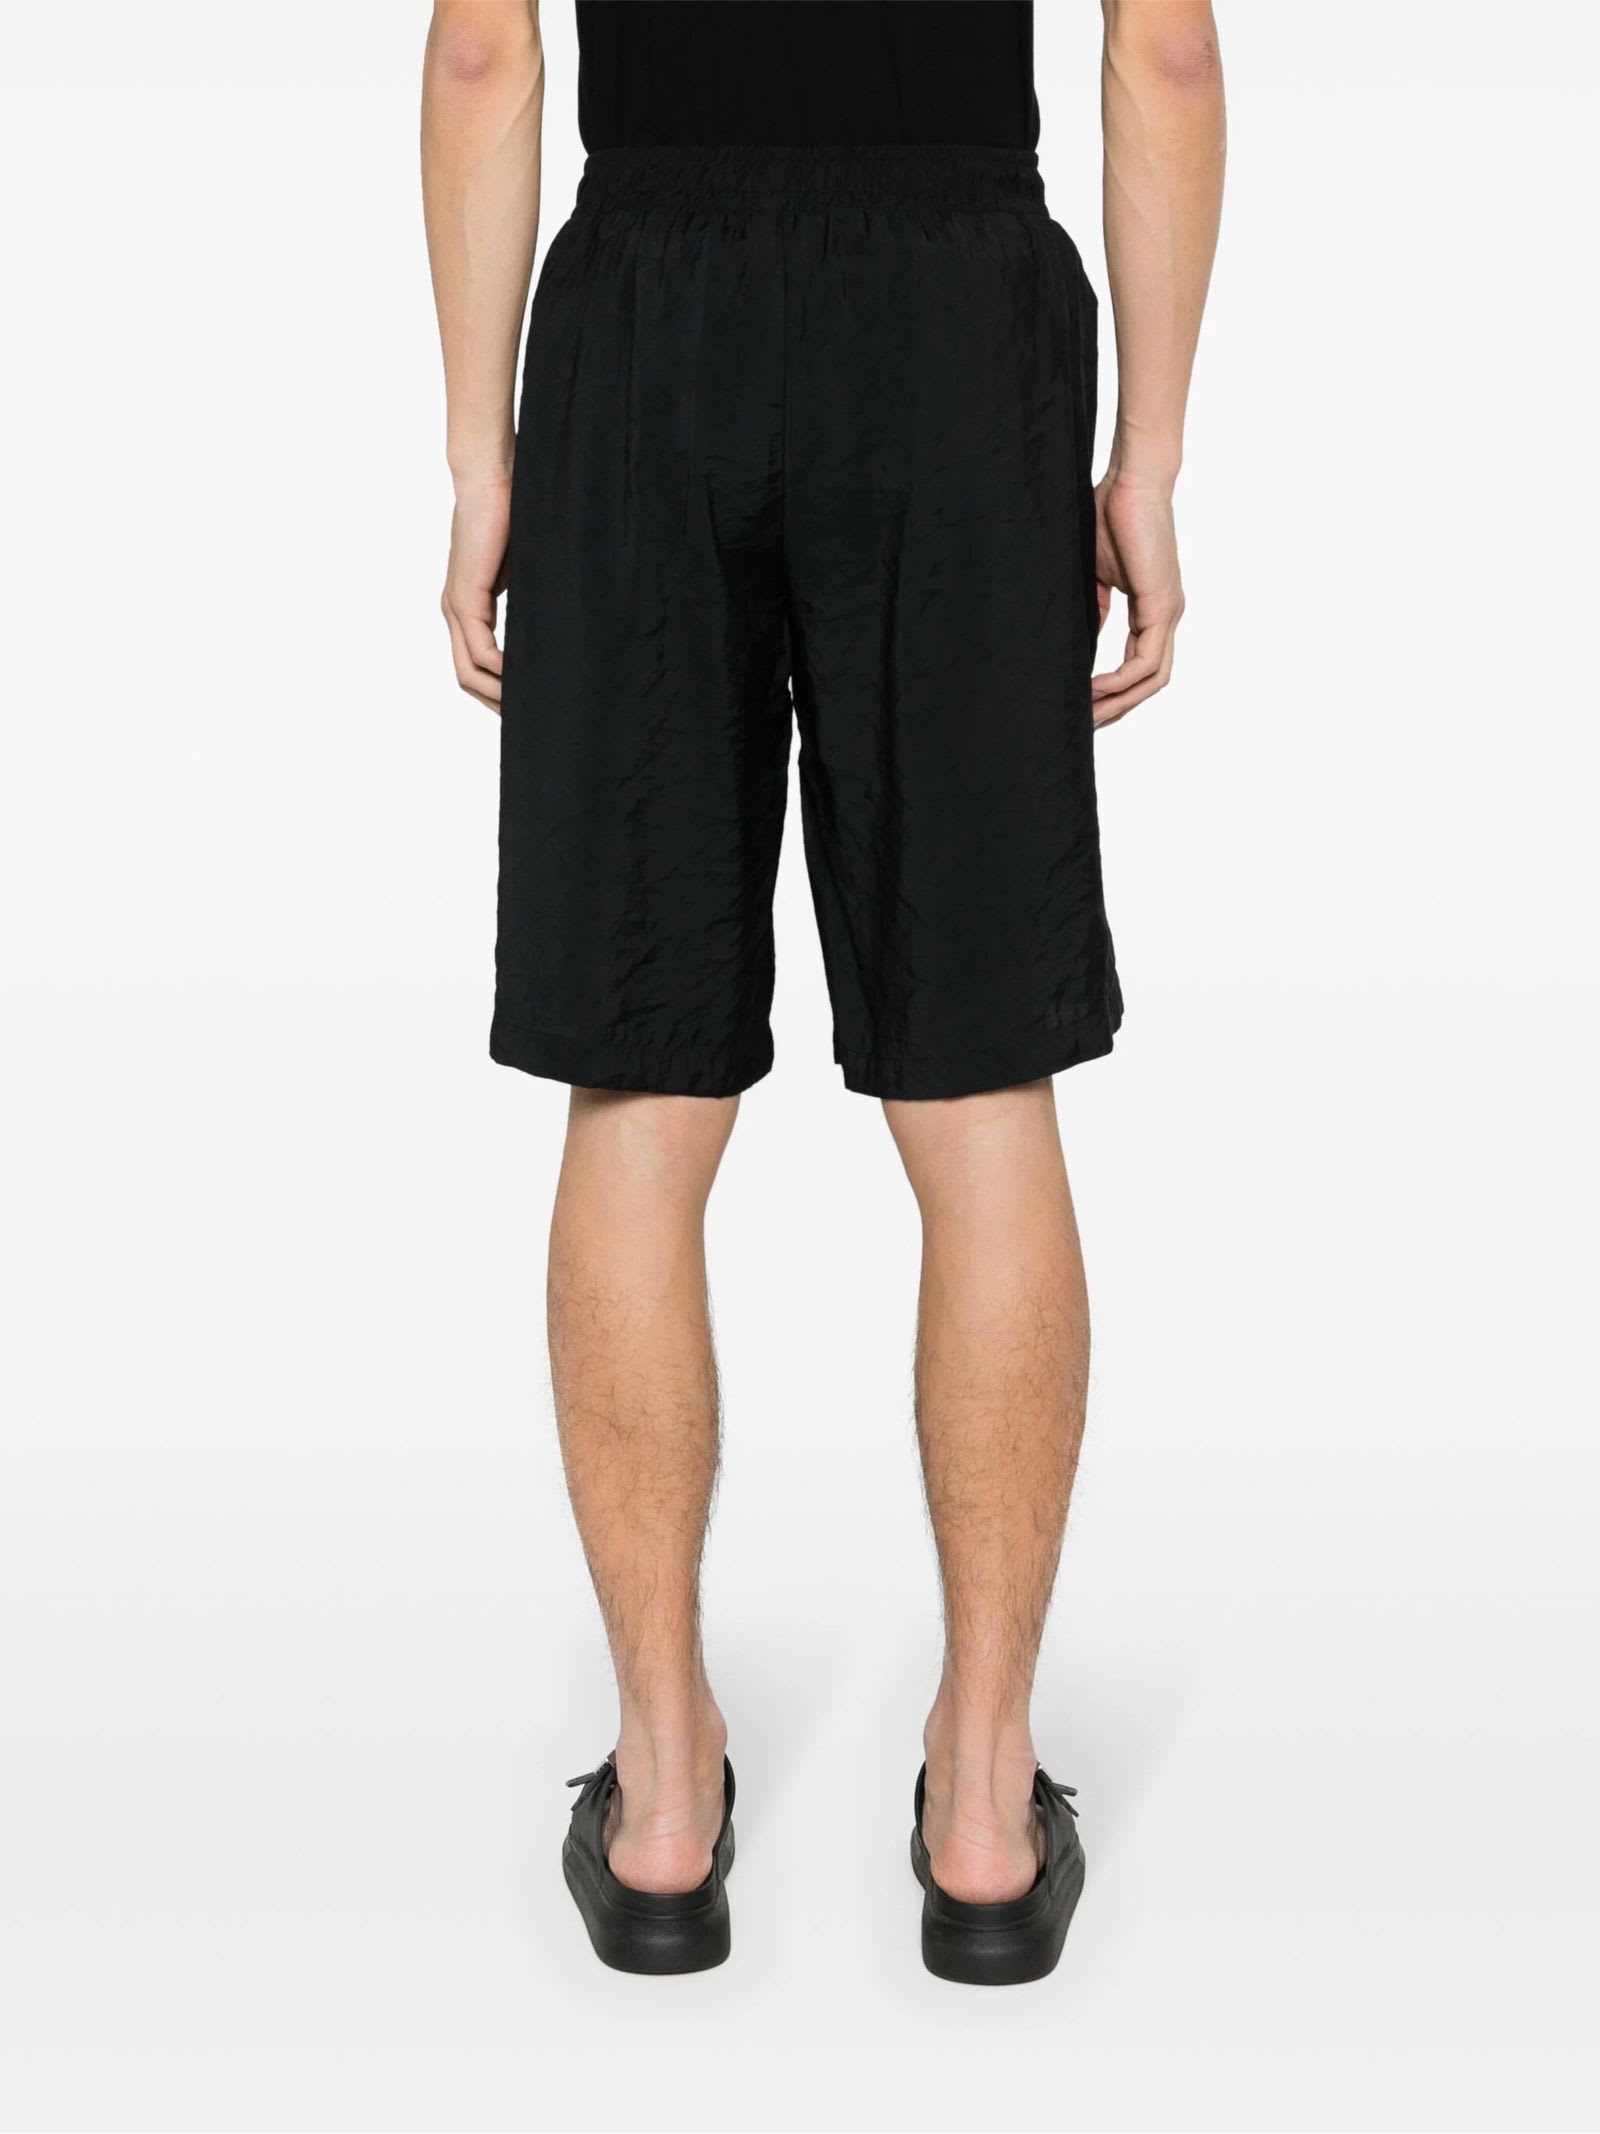 Shop Family First Milano Family First Shorts Black